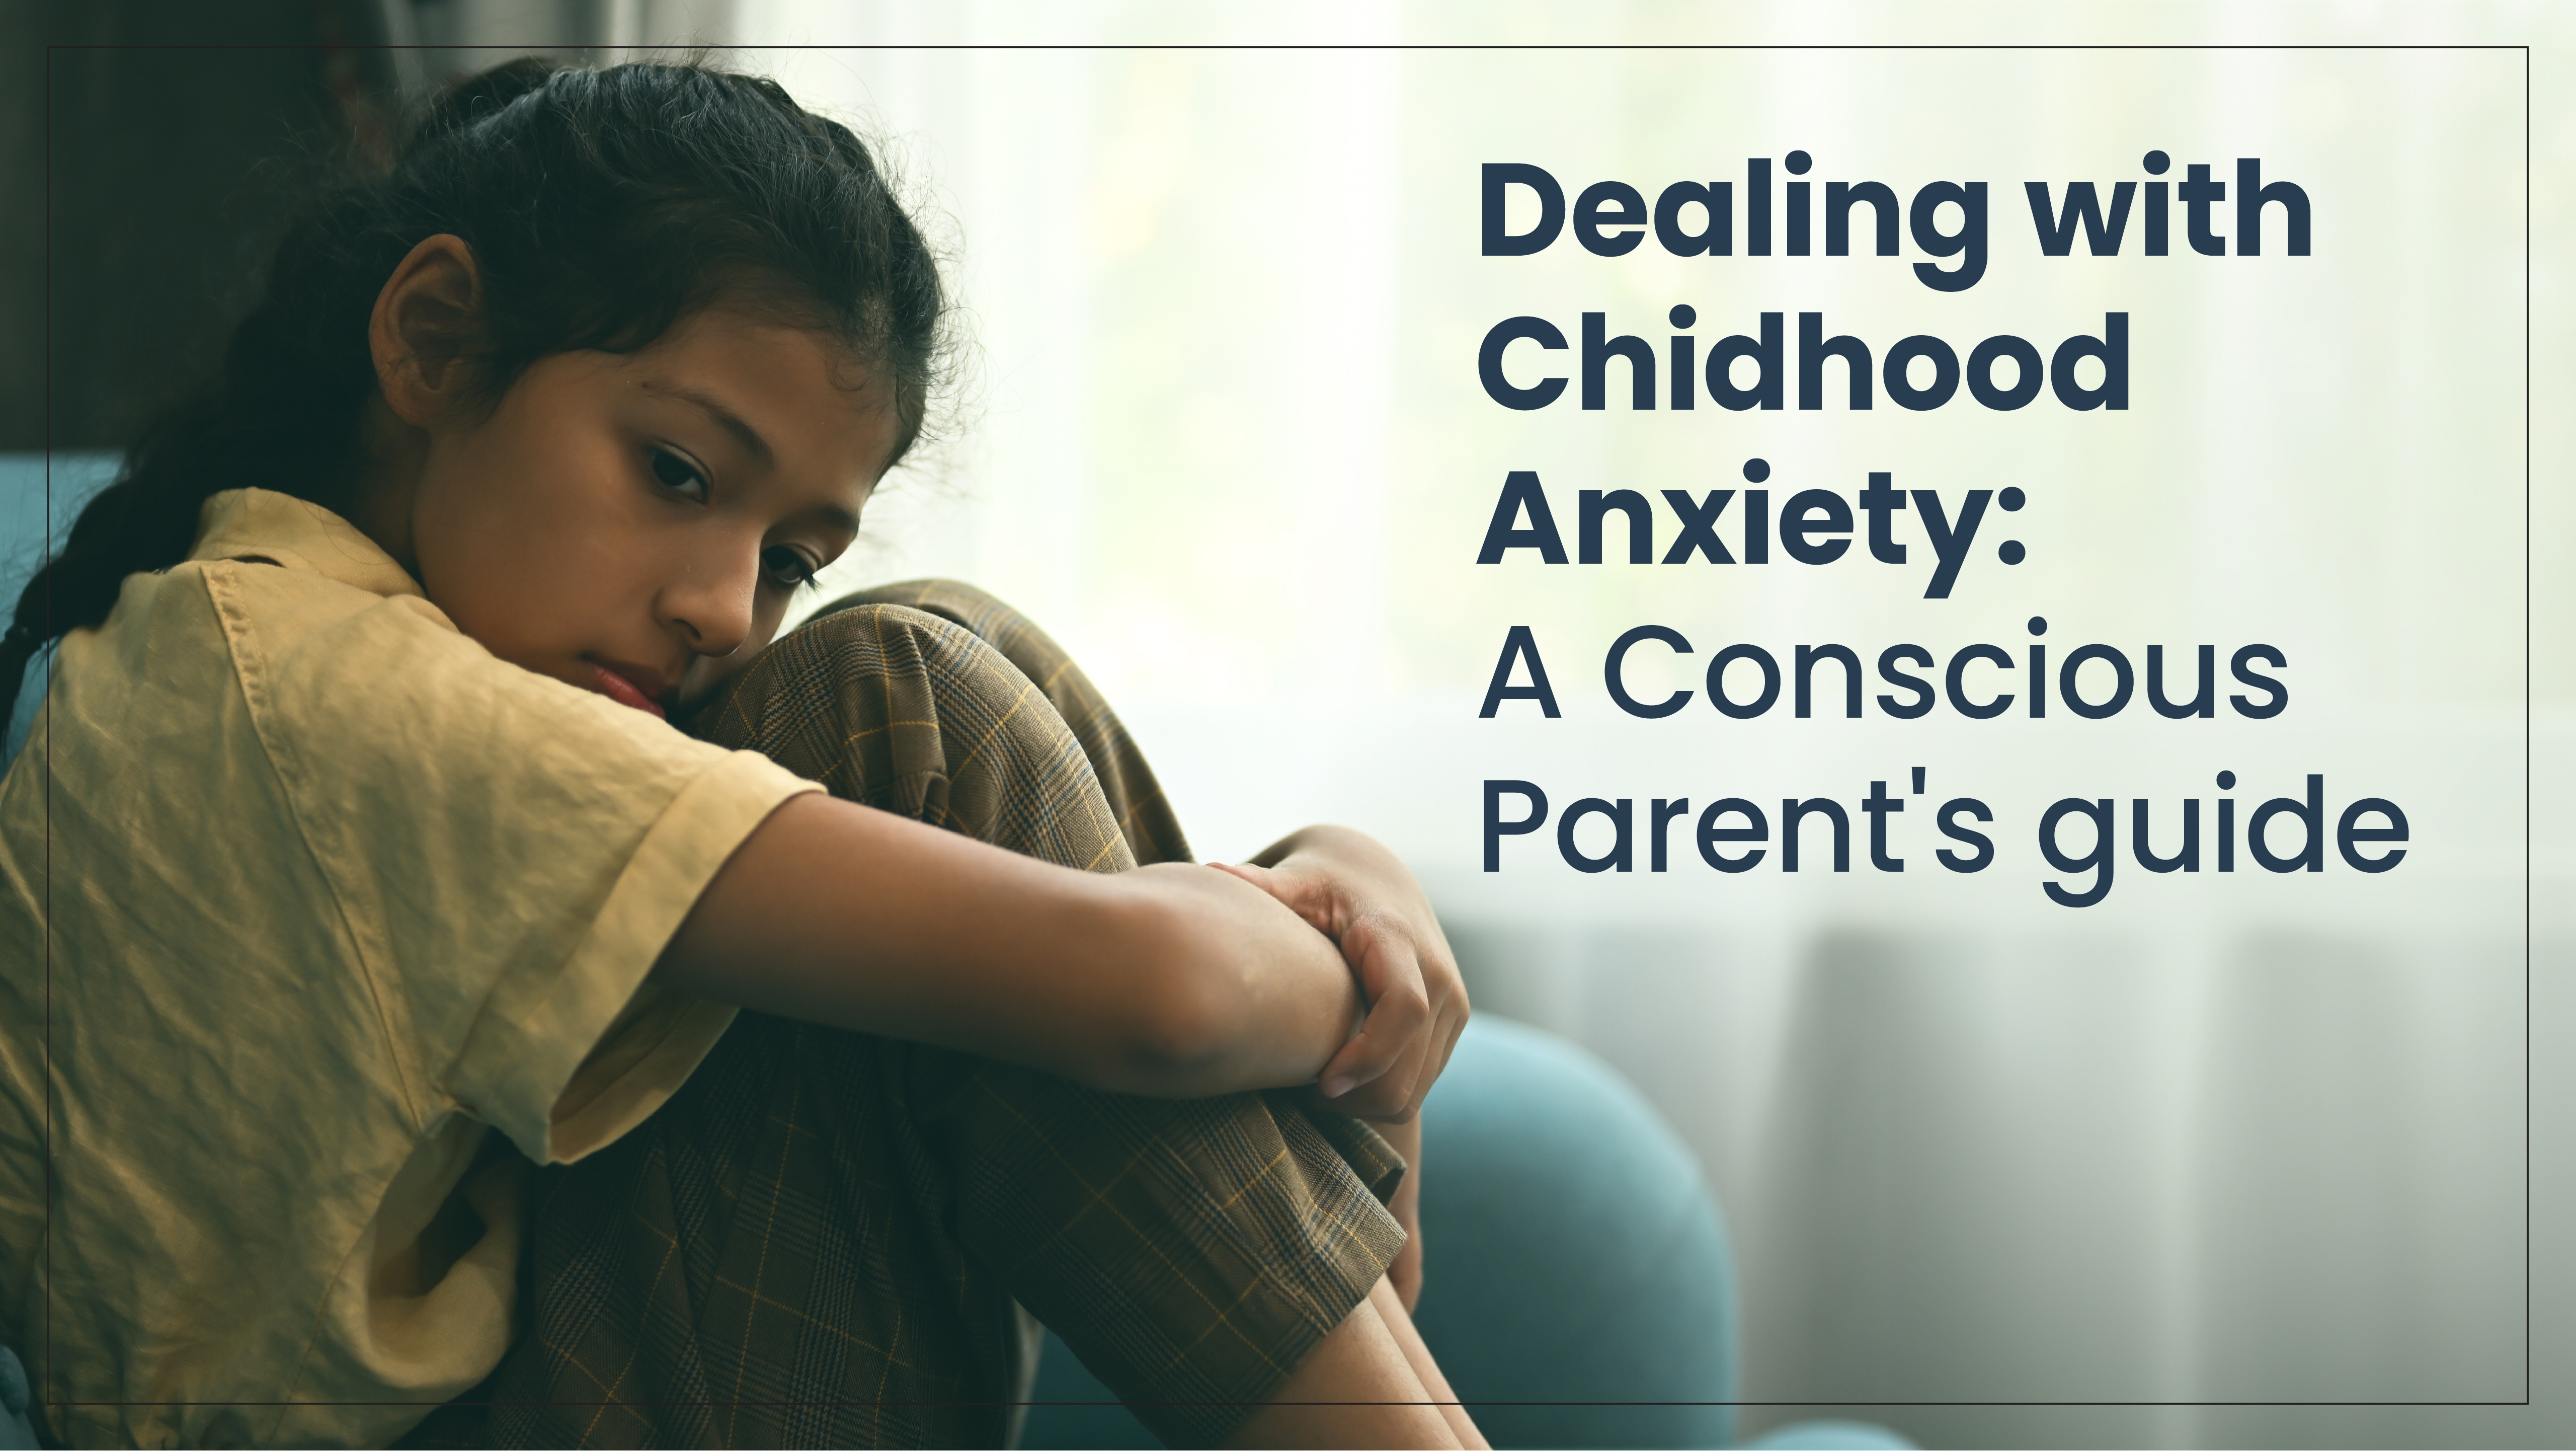 Dealing with Childhood Anxiety